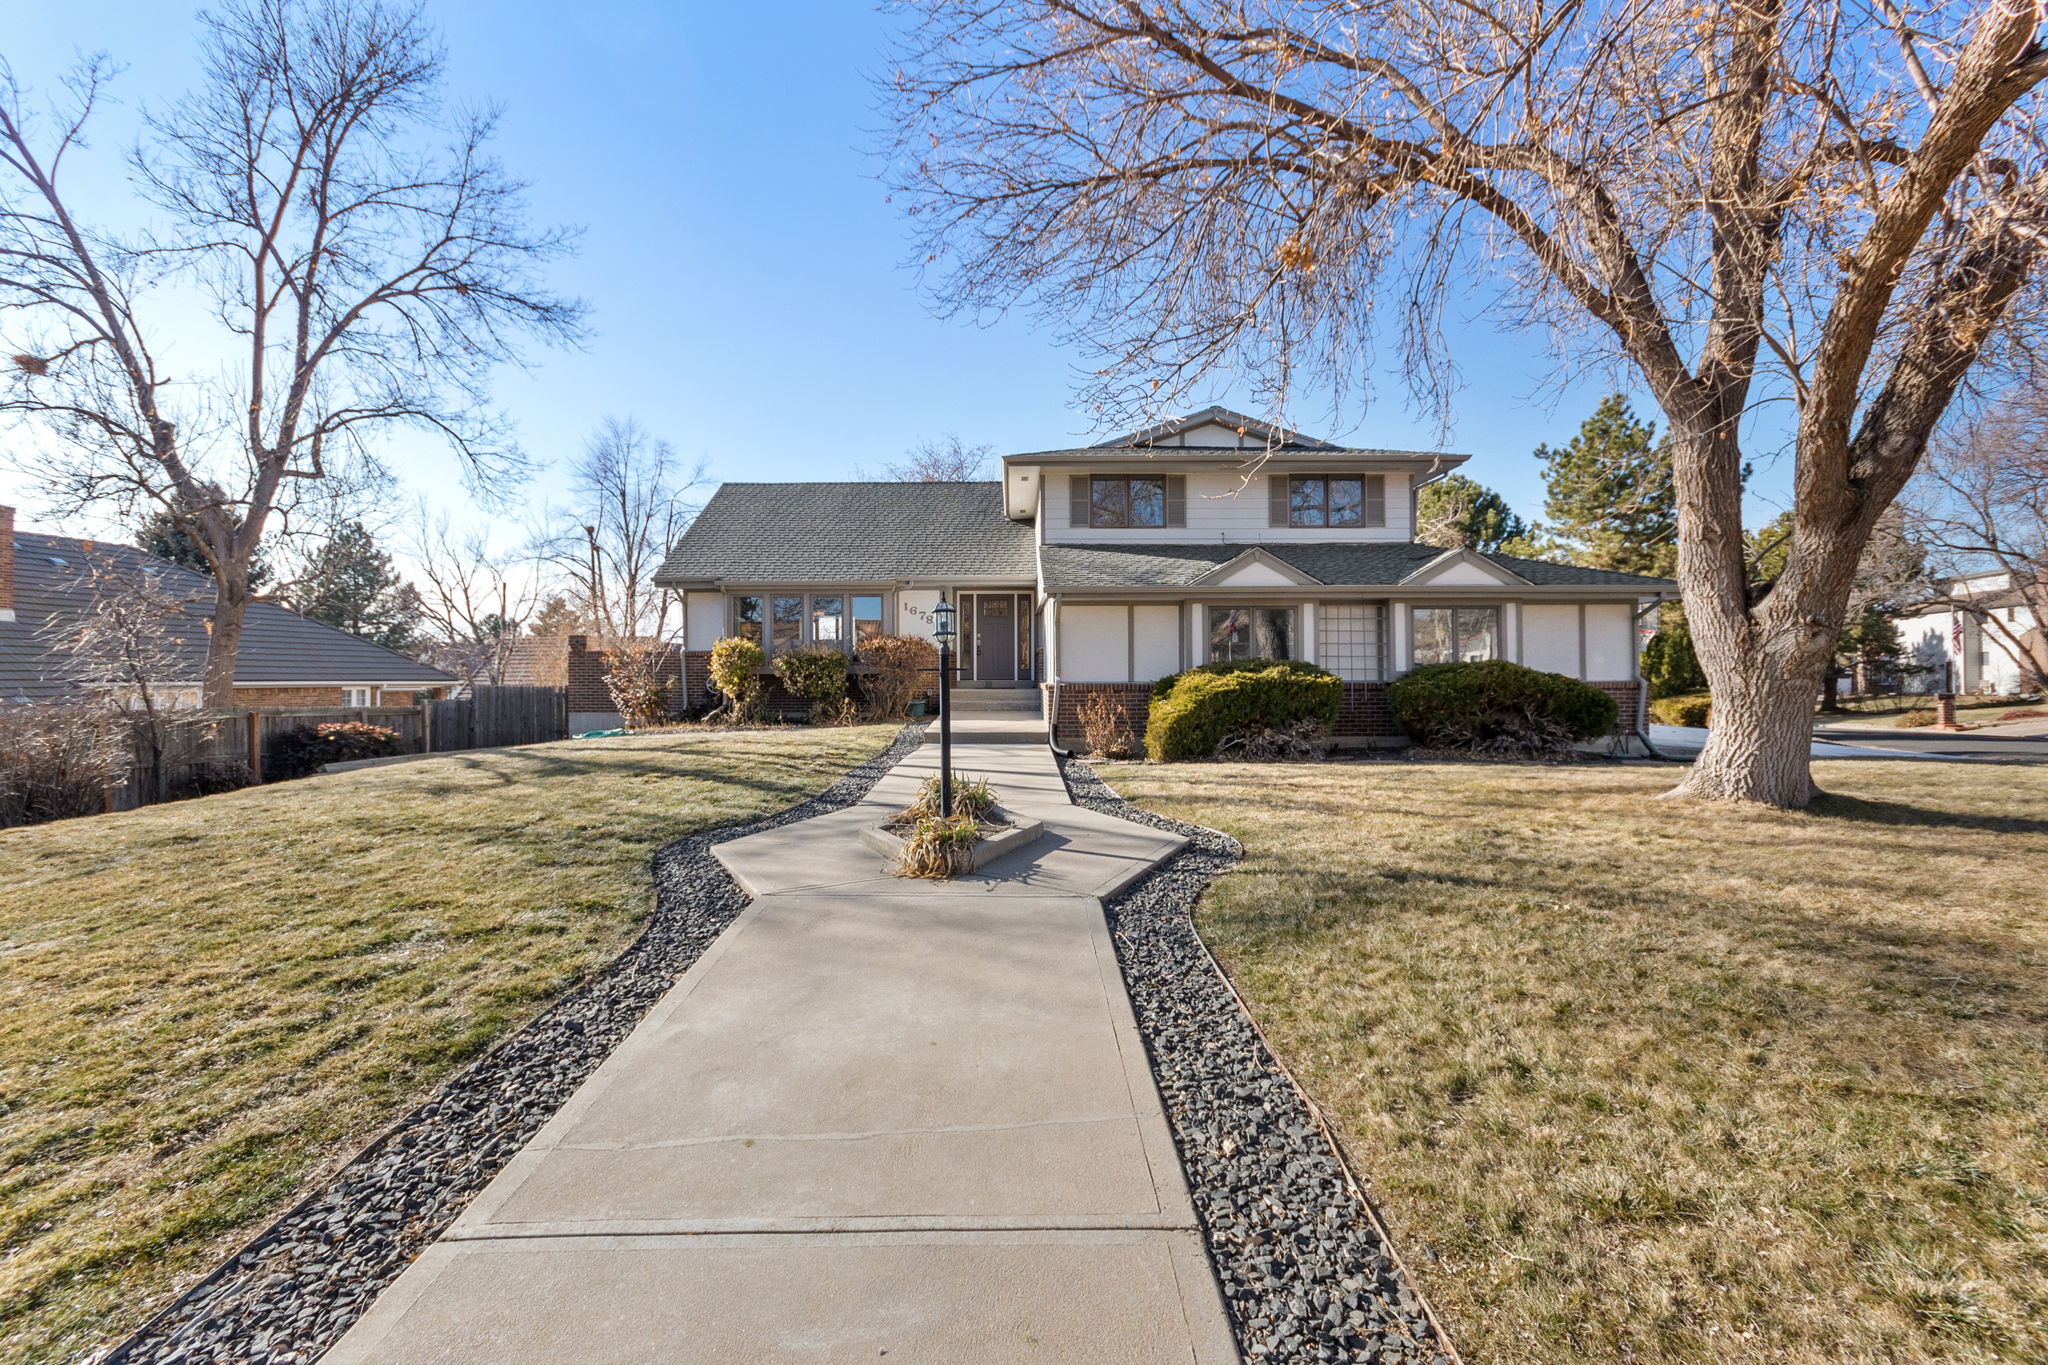  1678 W 115th Cir, Westminster, CO 80234, US